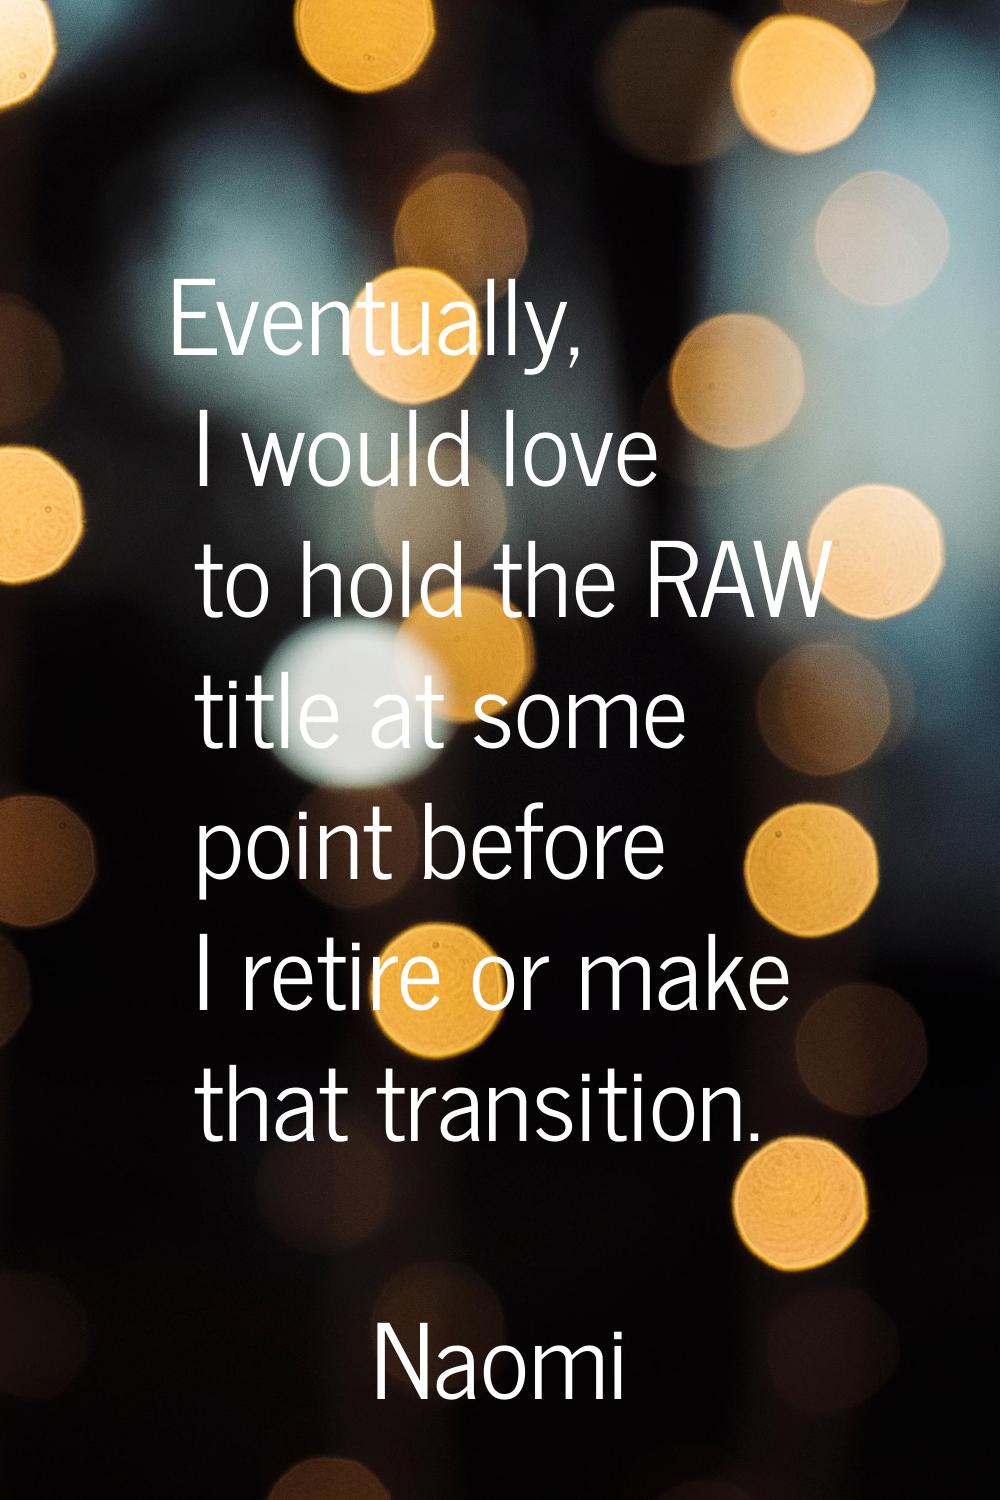 Eventually, I would love to hold the RAW title at some point before I retire or make that transitio